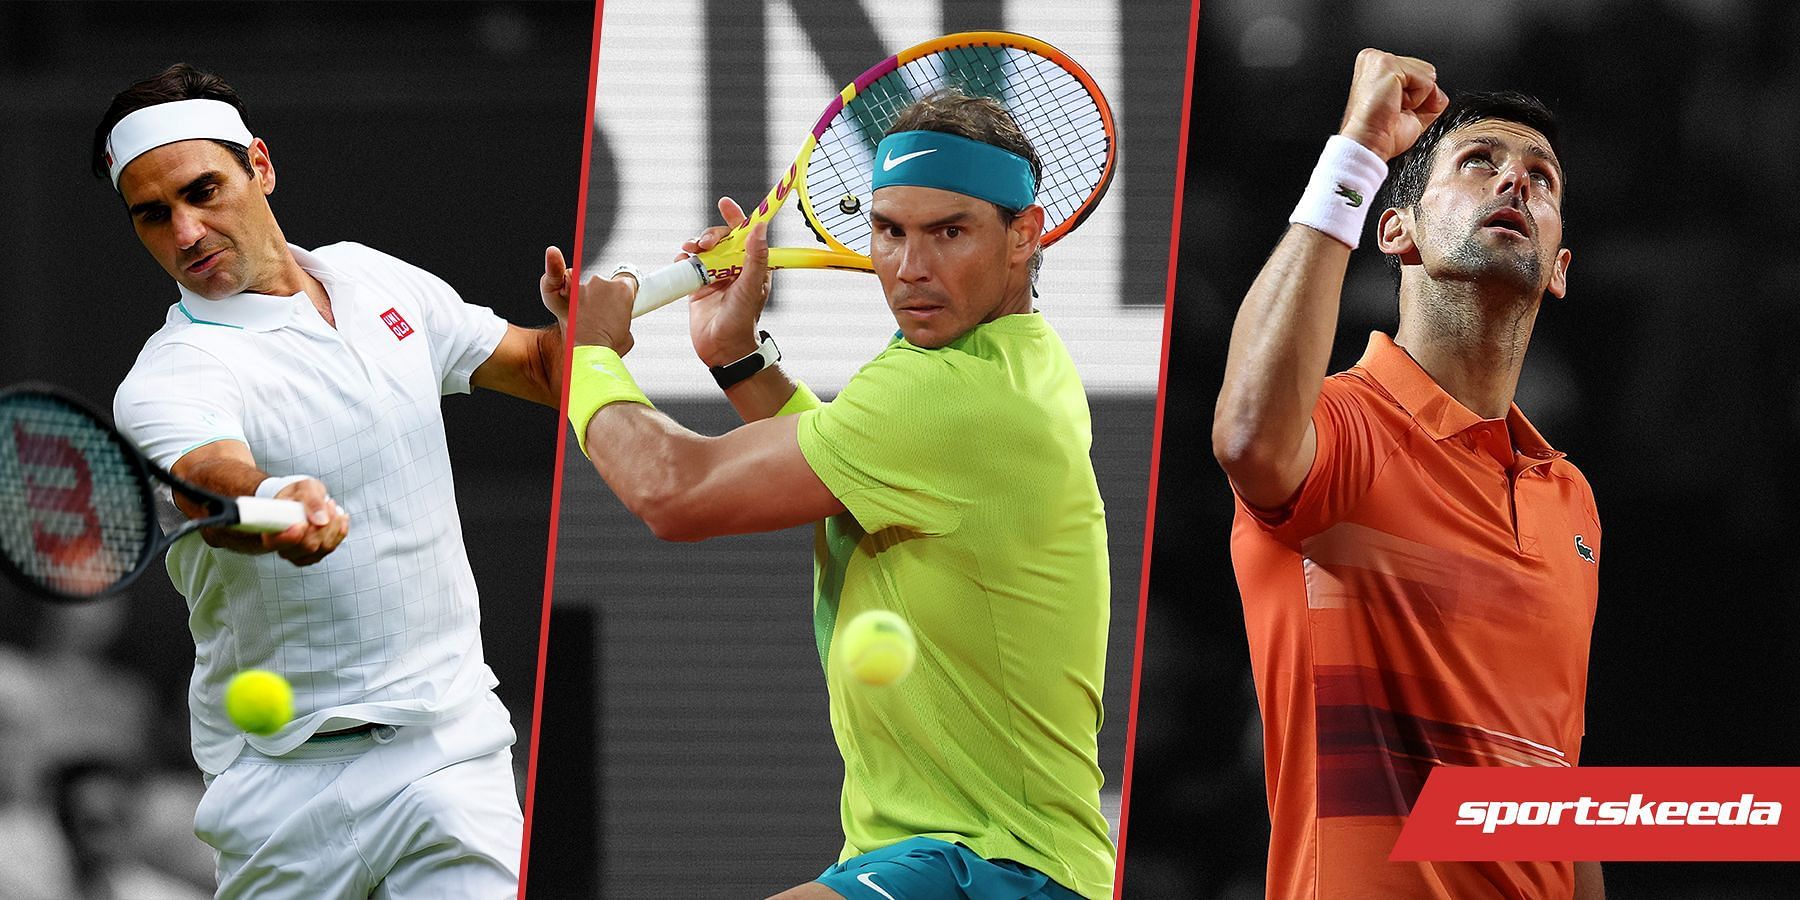 Roger Federer, Rafael Nadal, and Novak Djokovic have a combined tally of 61 Grand Slam titles between them.